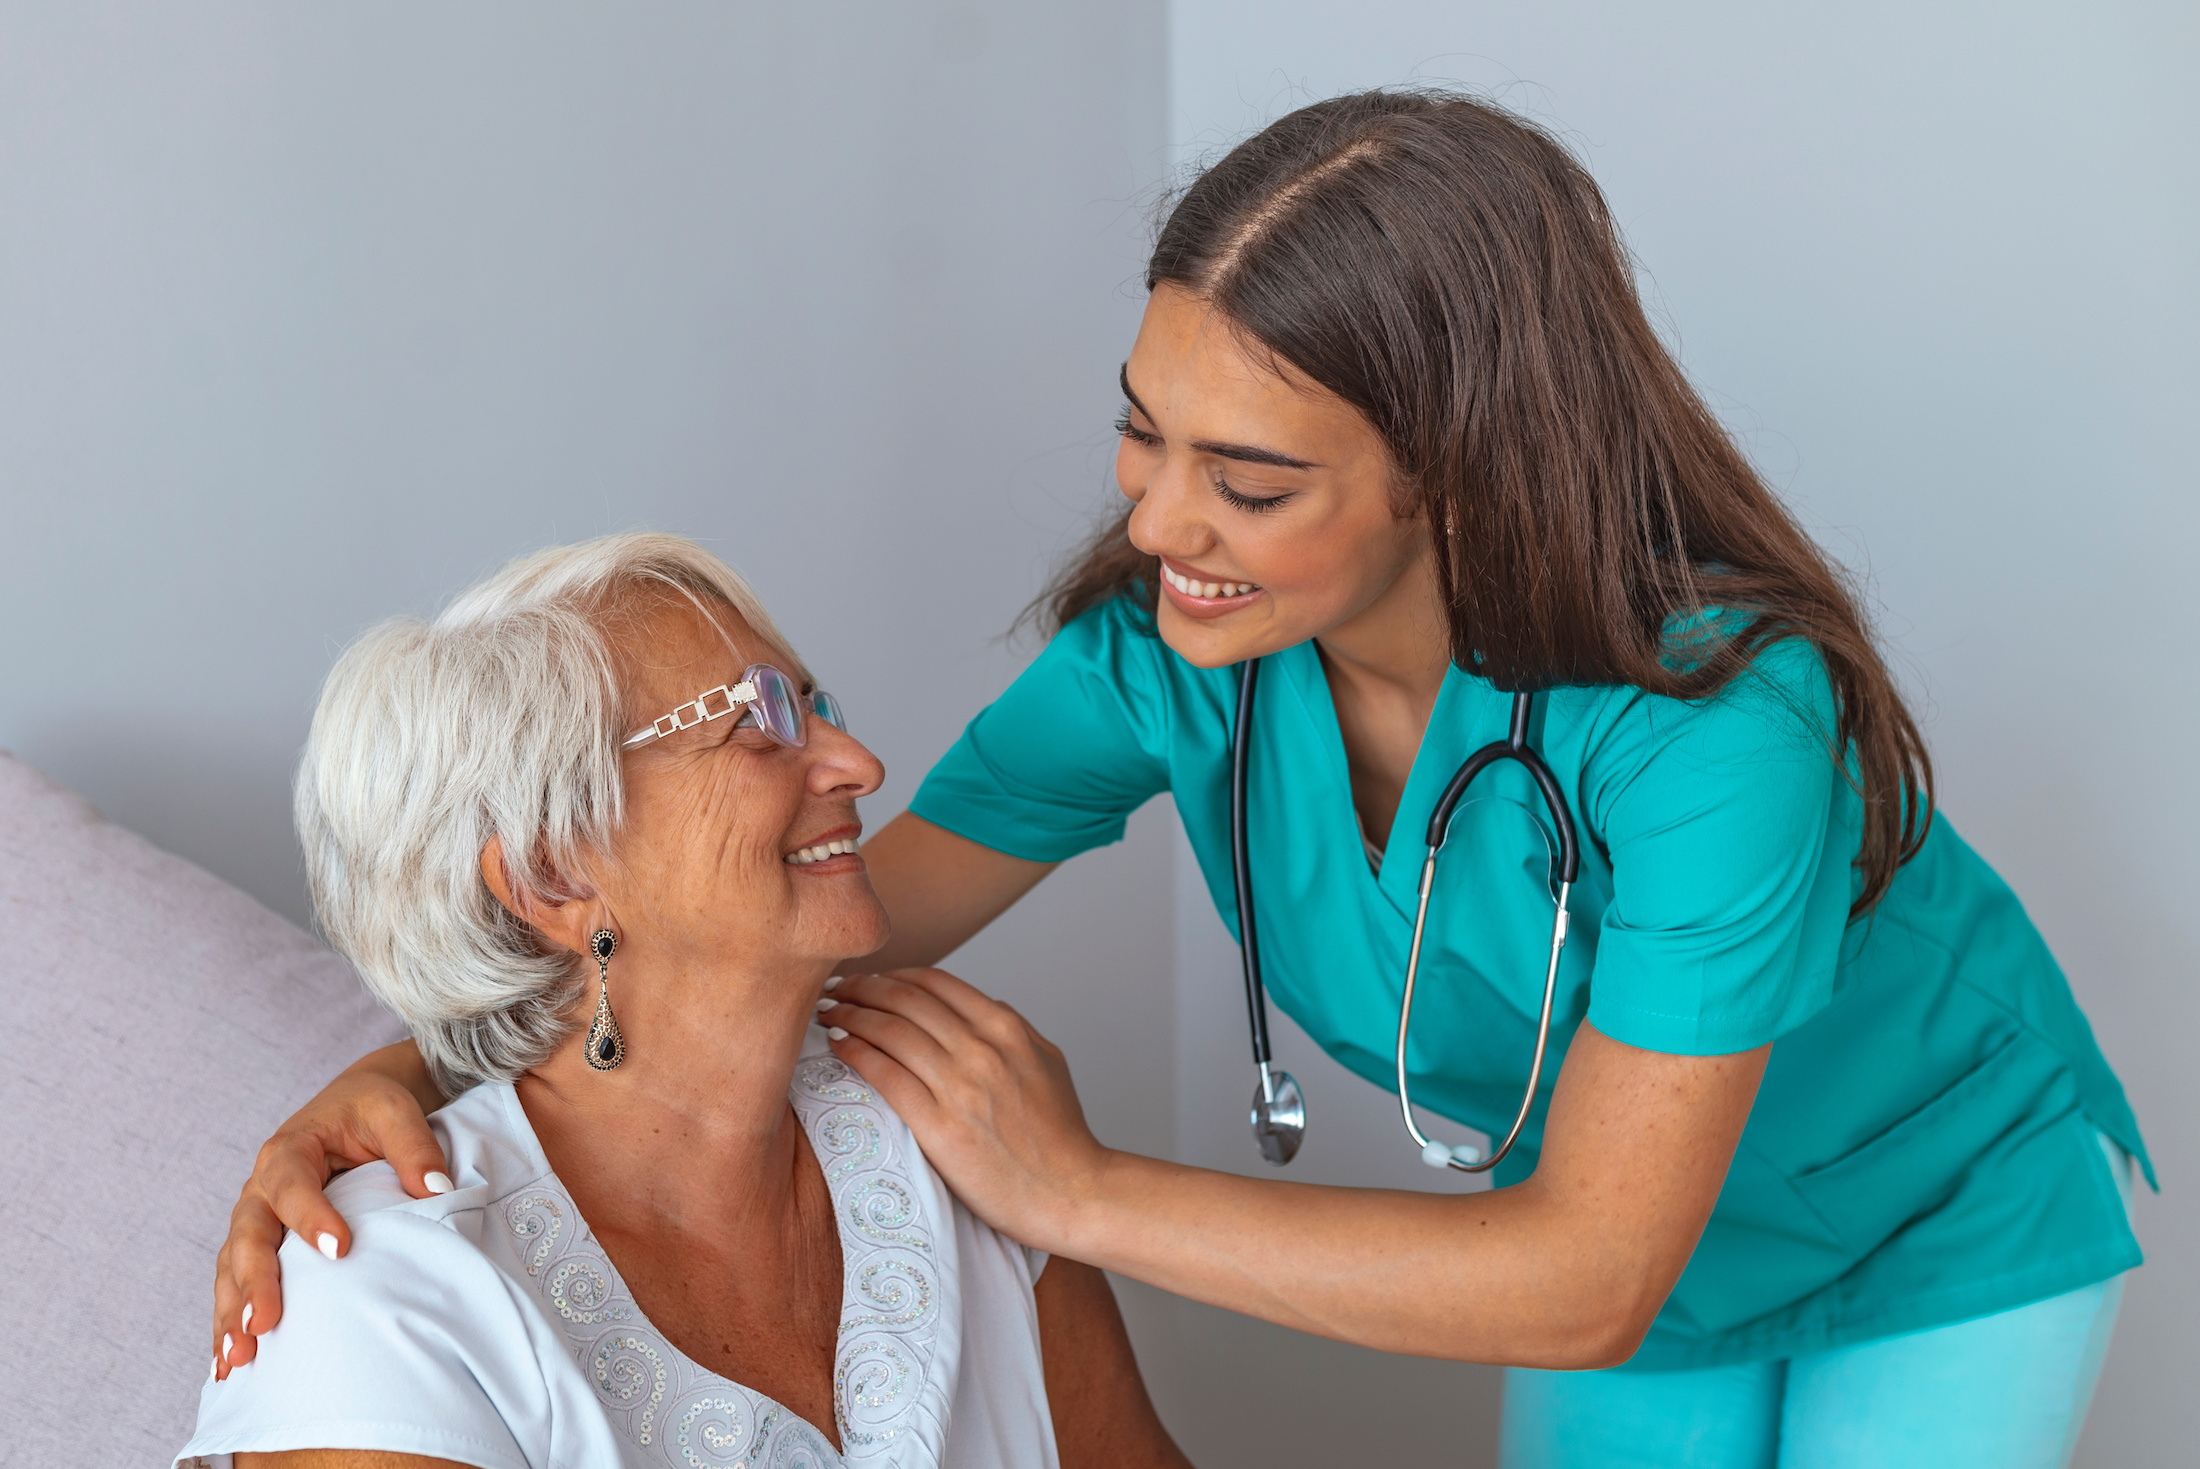 A smiling nurse comforting an elderly patient